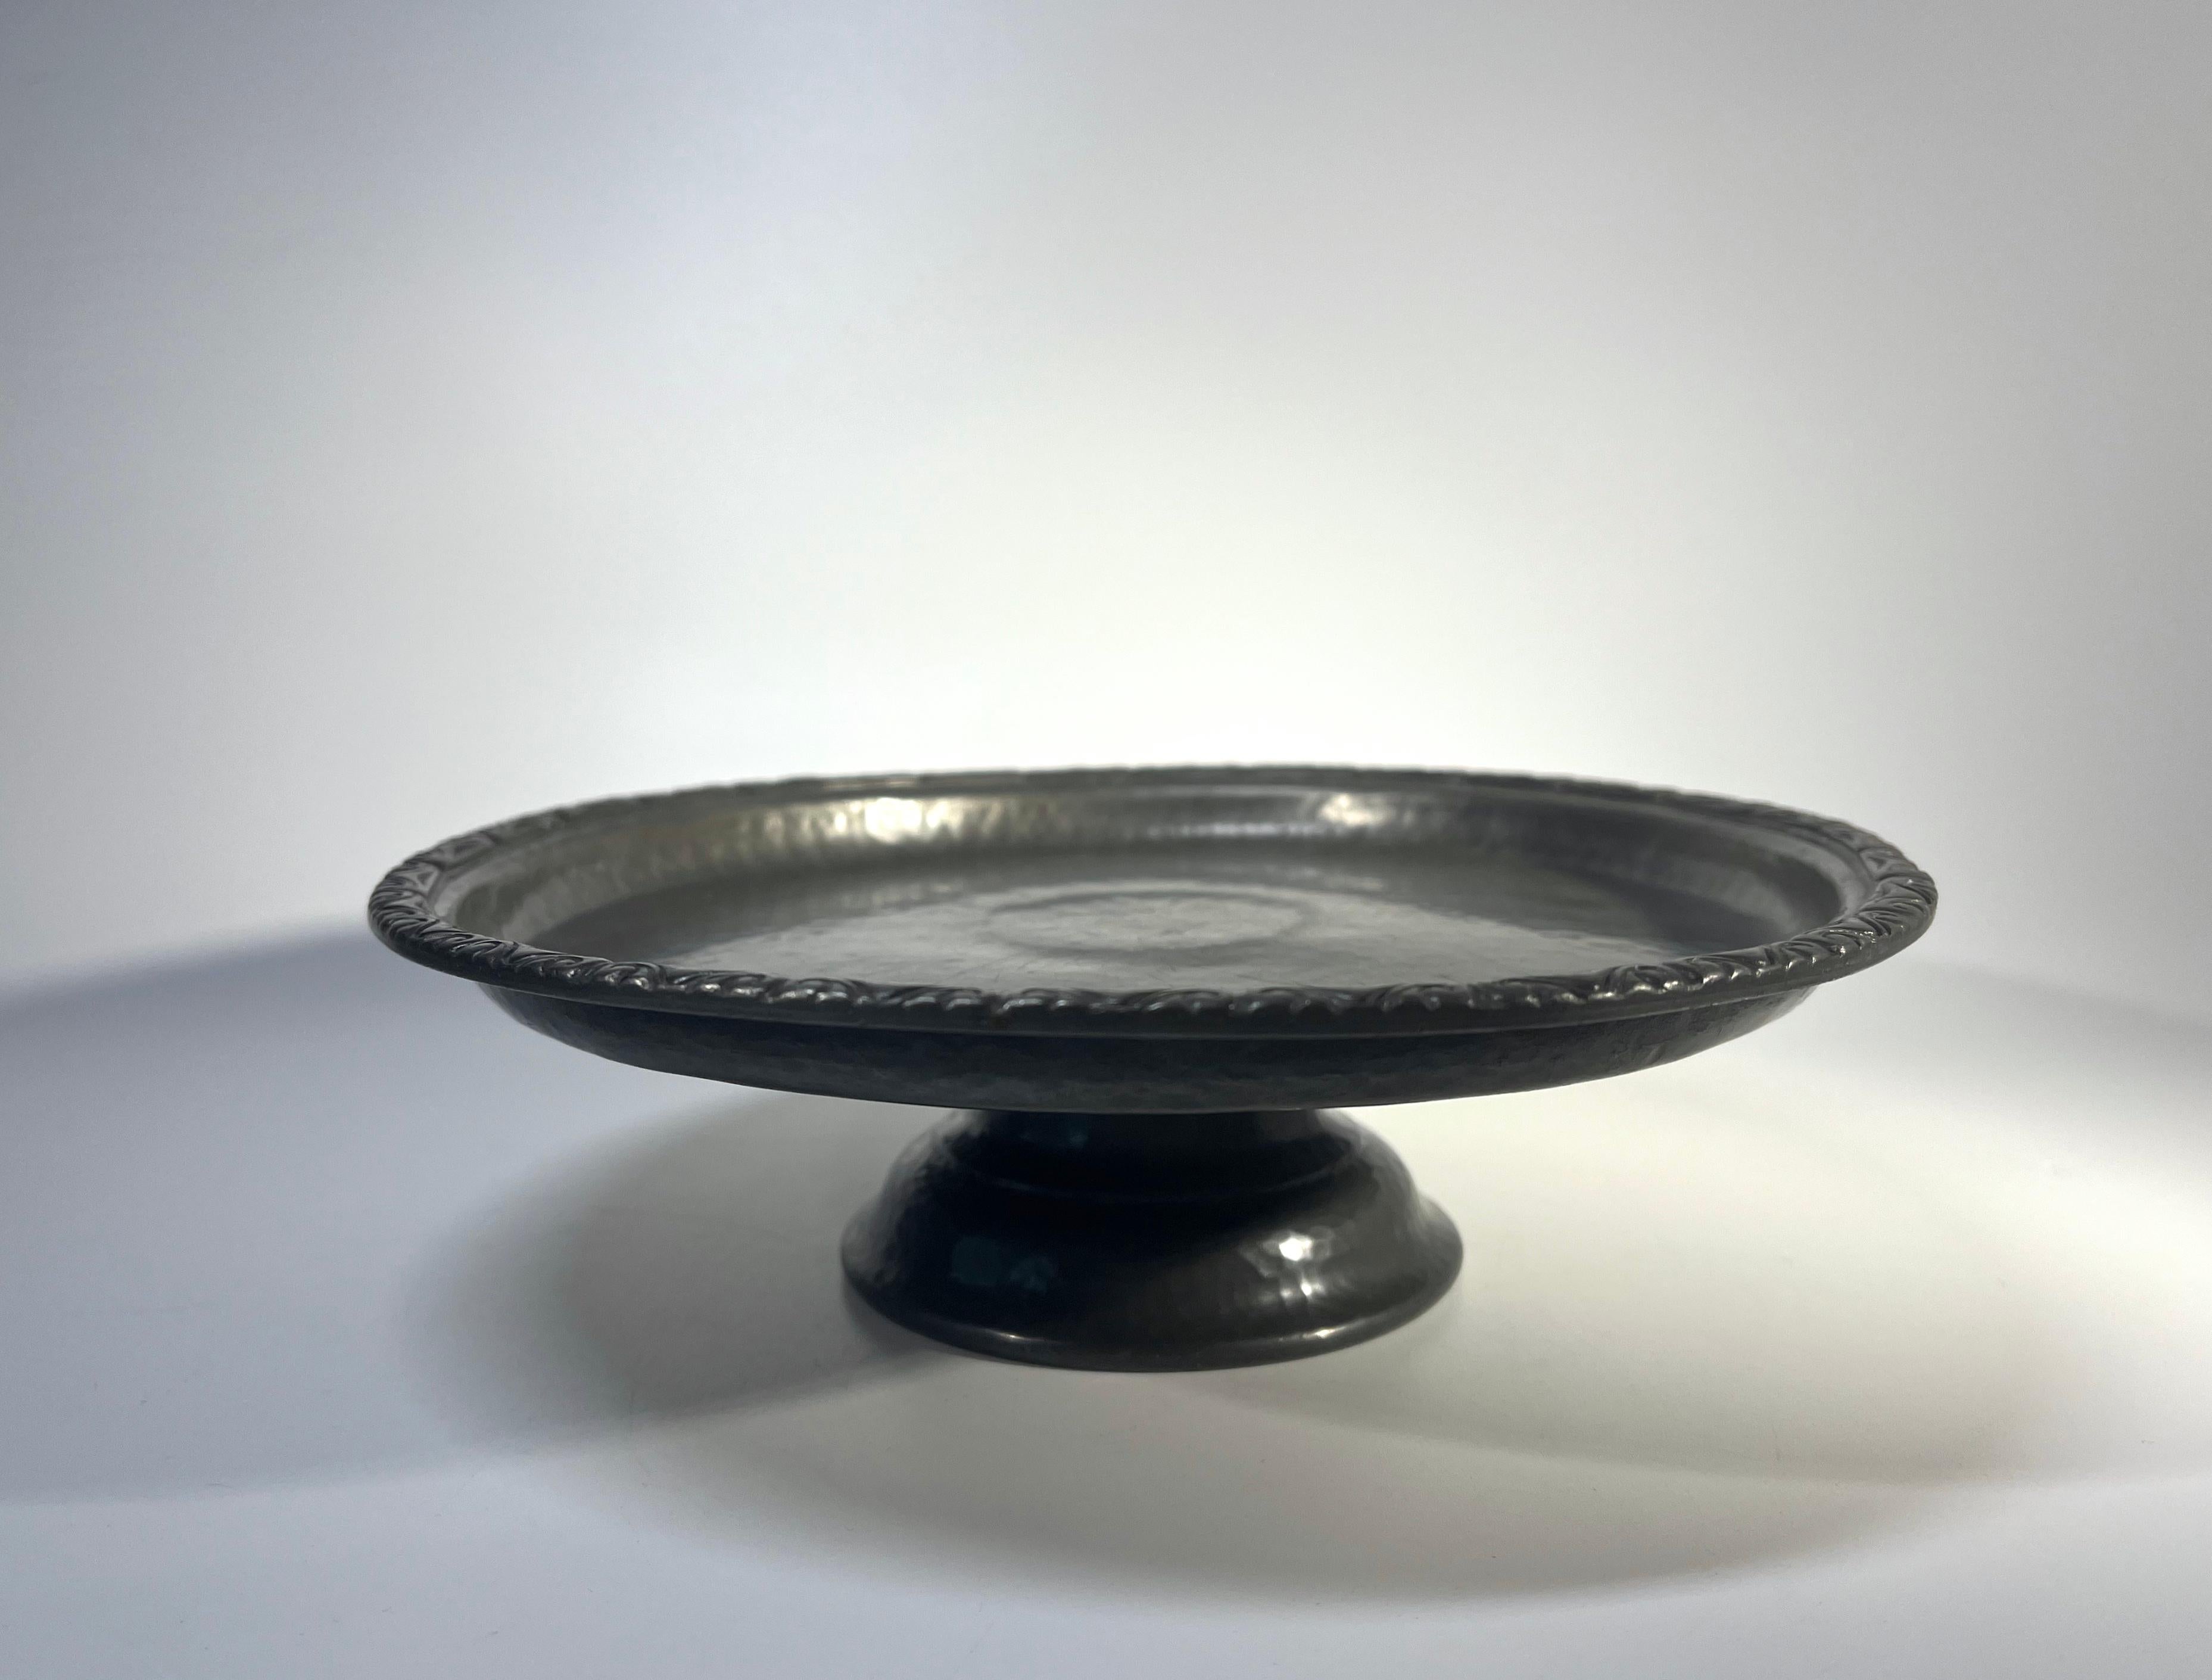 Art Nouveau antique pewter footed tray made by Liberty & Co., Regent Street, London
Historic household piece of English pewter with hand hammered stylised decoration
Circa 1910
Signed English Pewter, Made By Liberty & Co 01371 to base
Height 2.25